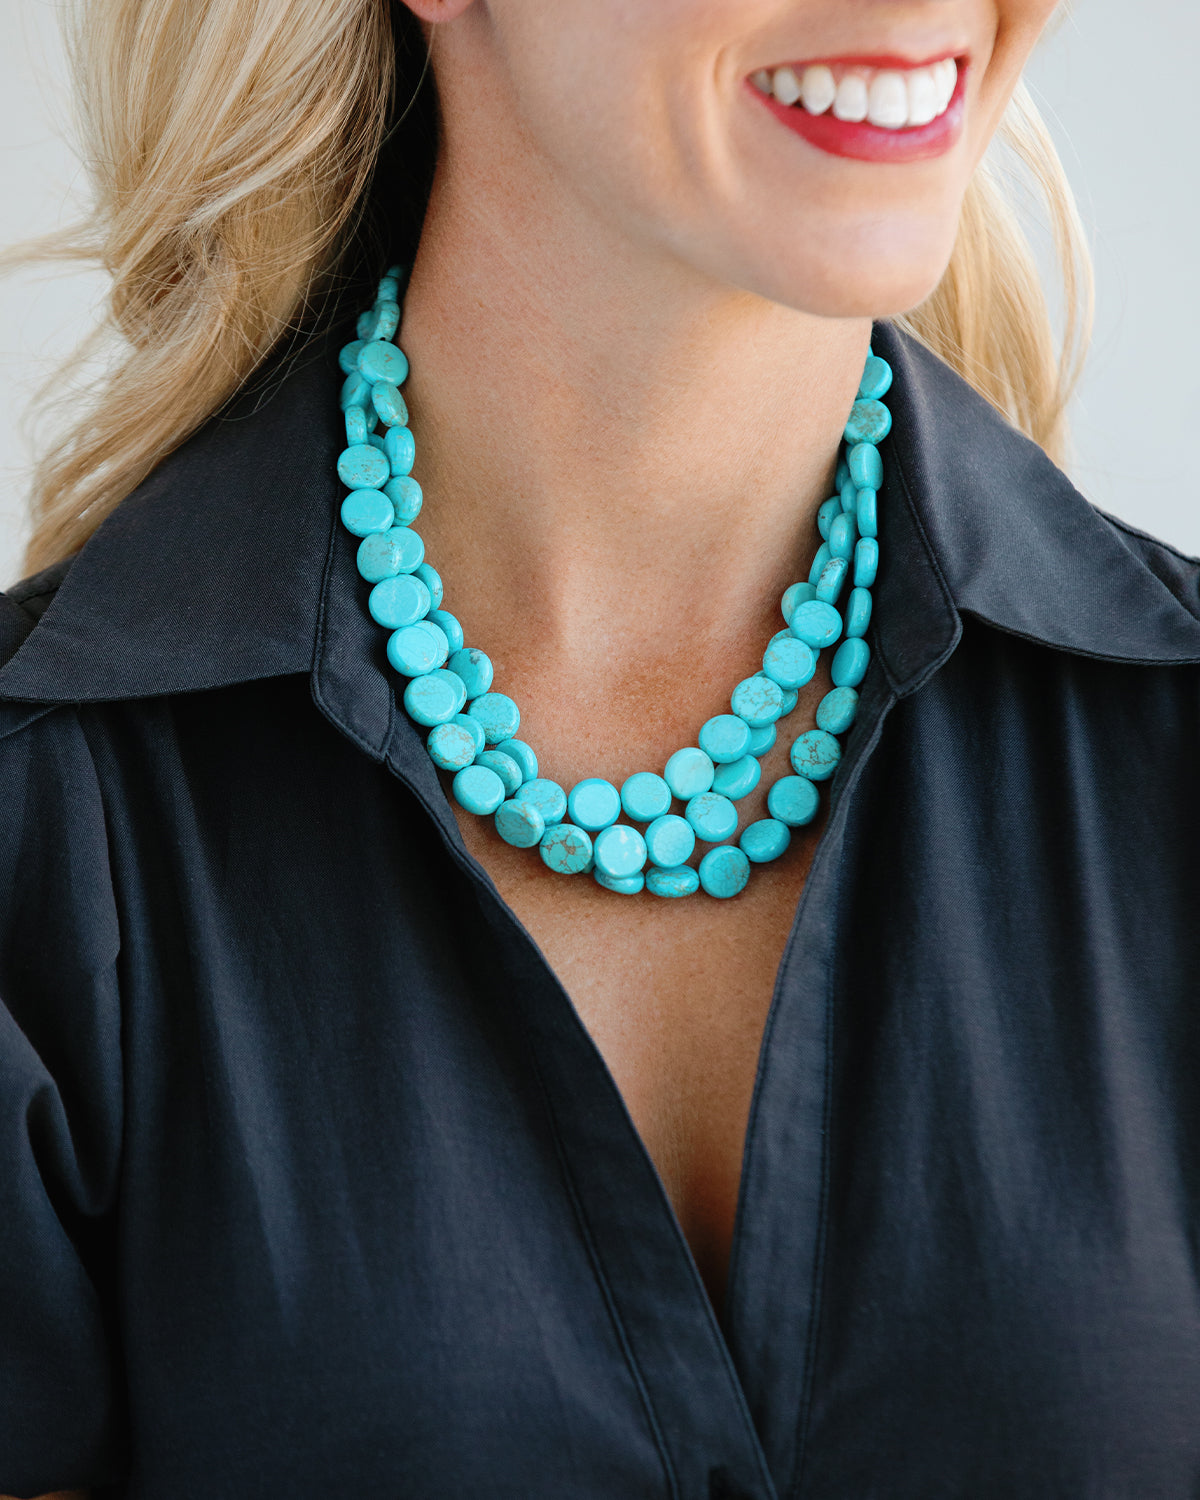 Necklace with Turquoise